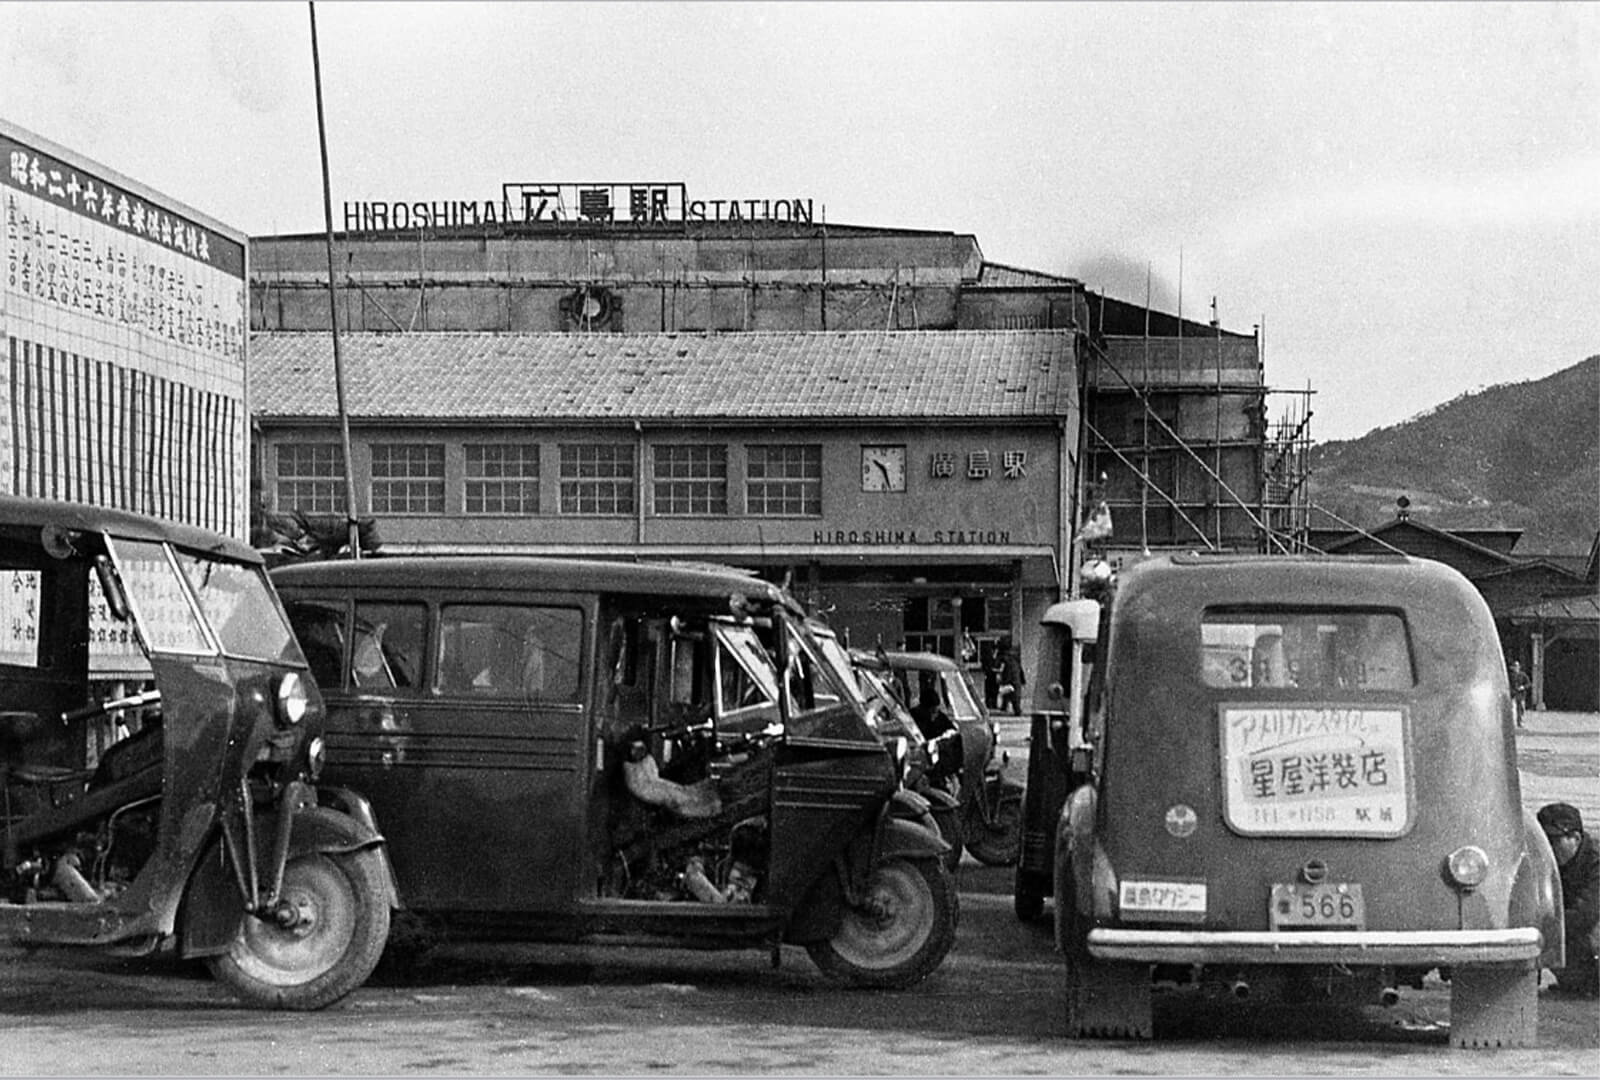 Hiroshima station with vehicles parked in front in ca. 1940s photo